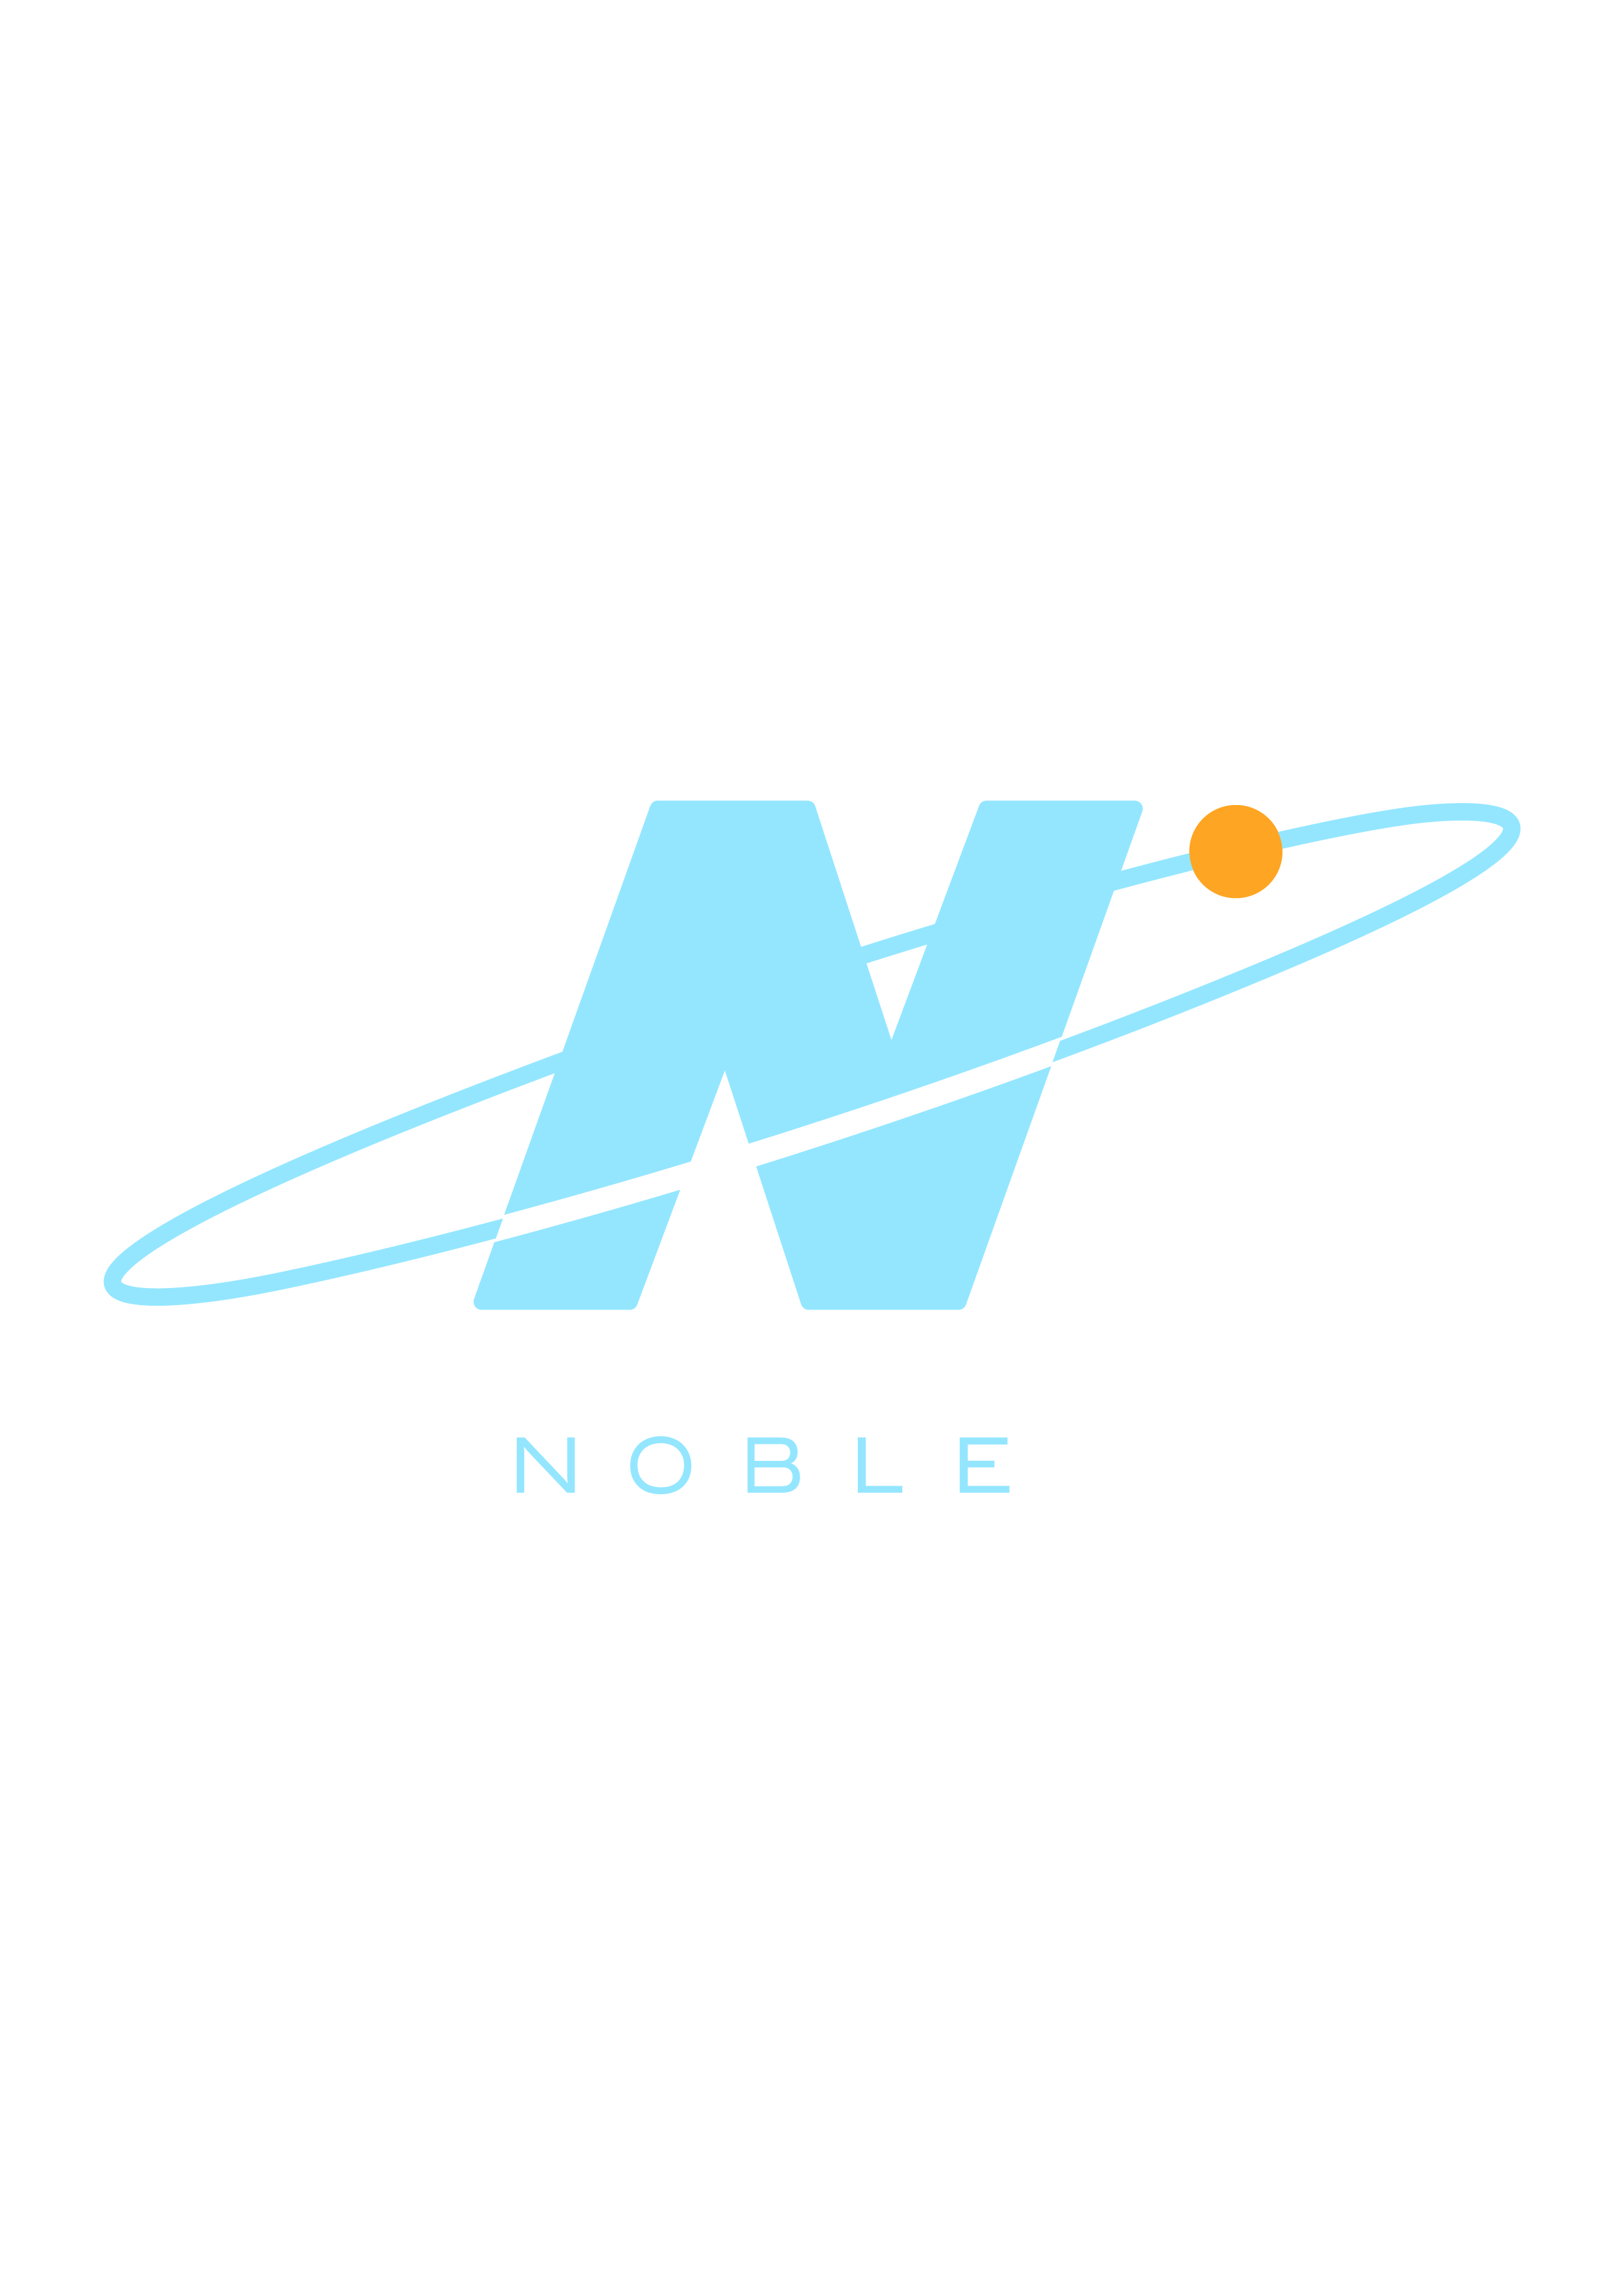 Noble Healthcare Limited